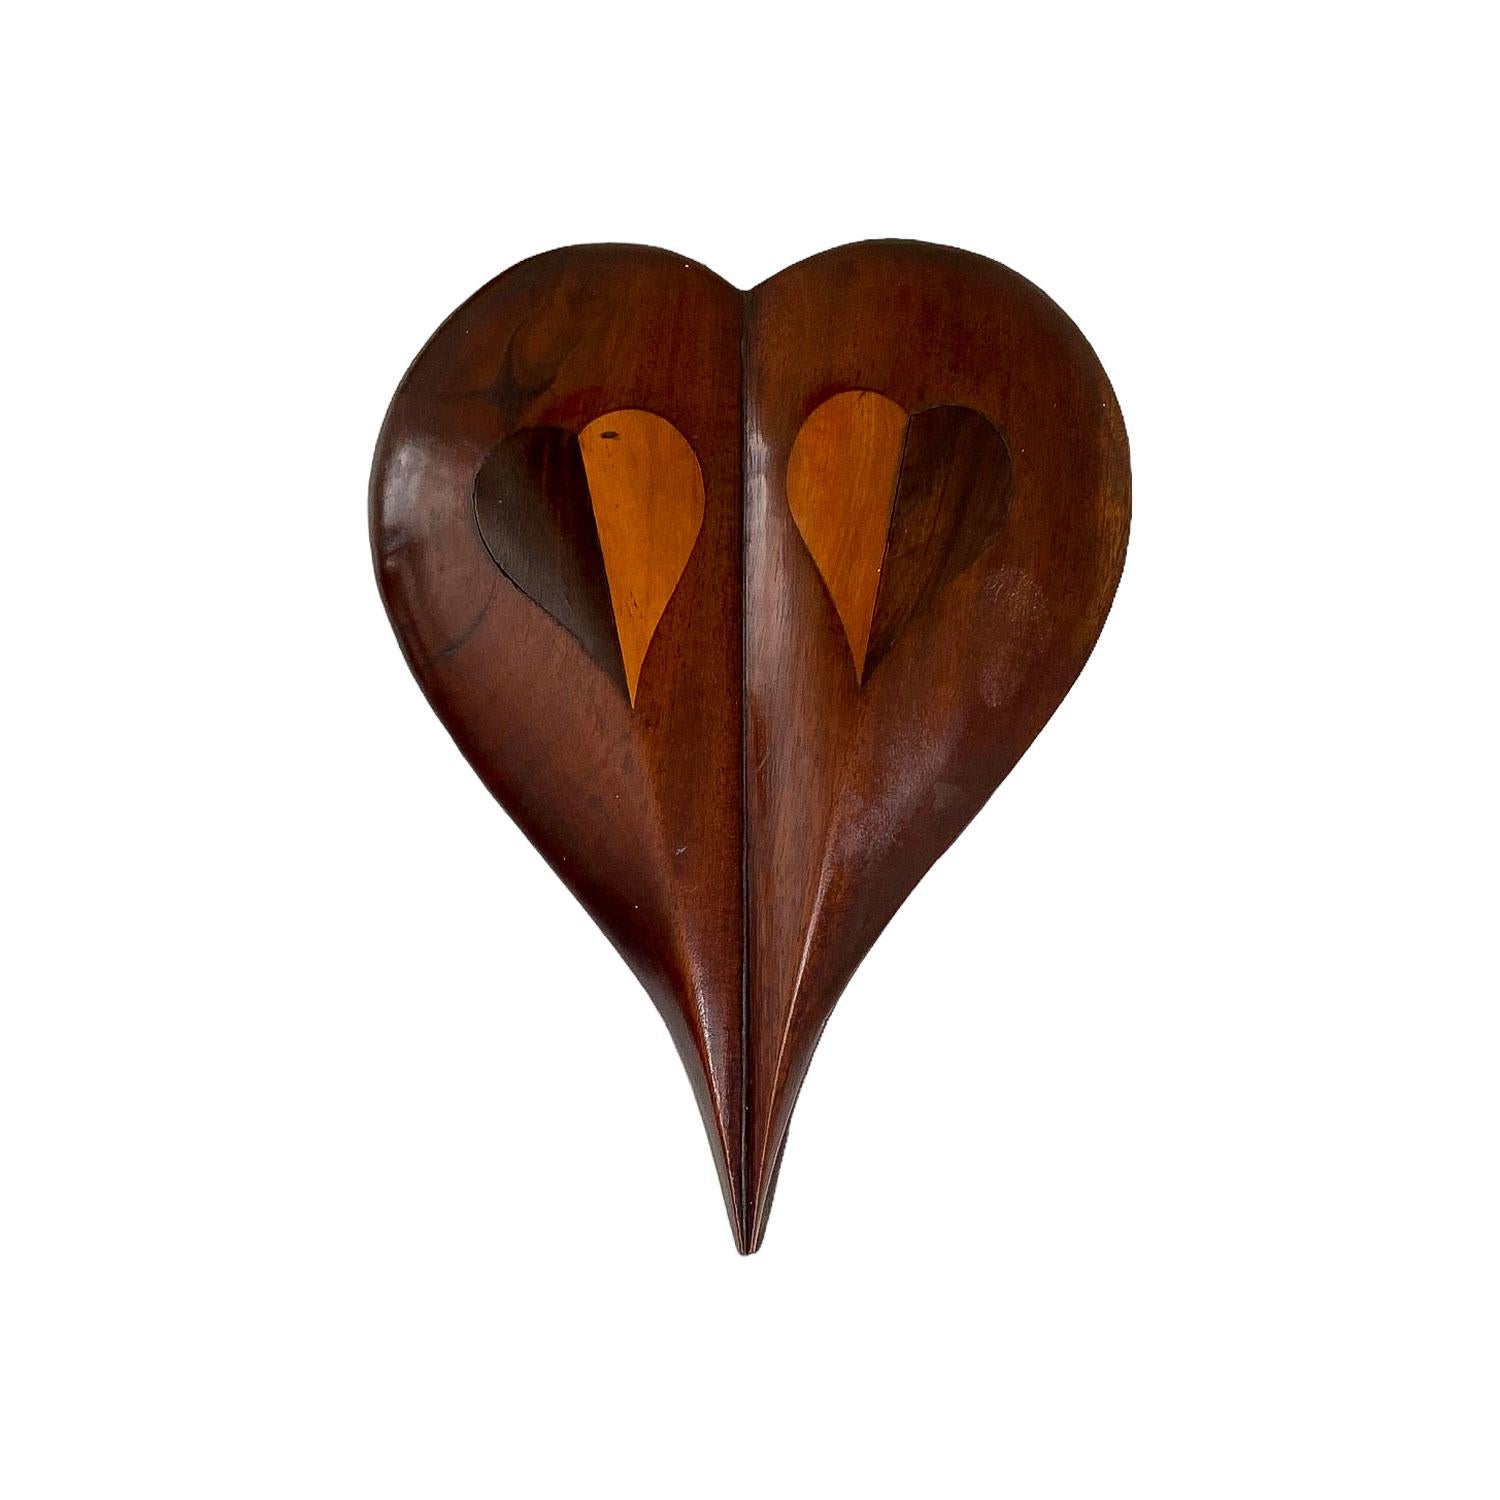 Heart shaped mahogany lift top box, domed with
heart inlay of fruitwood and stained mahogany.
American, circa 1930-1940
Measures: 2 ½” x 8 ½” x 6 ¼”.